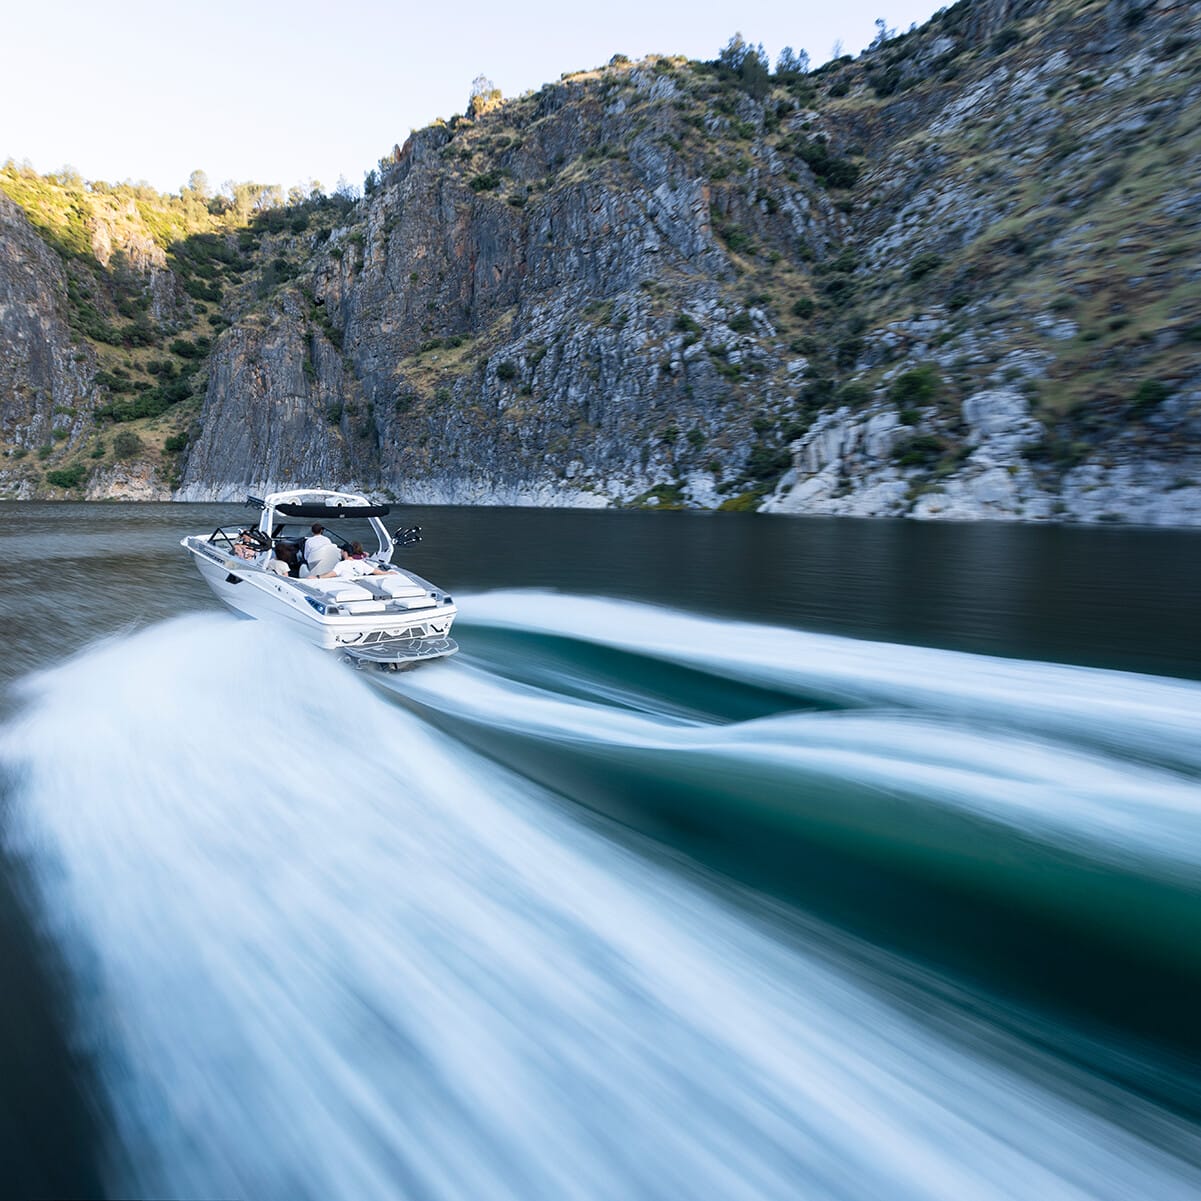 A speedboat rapidly moves through a narrow river with steep, rocky cliffs on either side, creating a wake behind it.